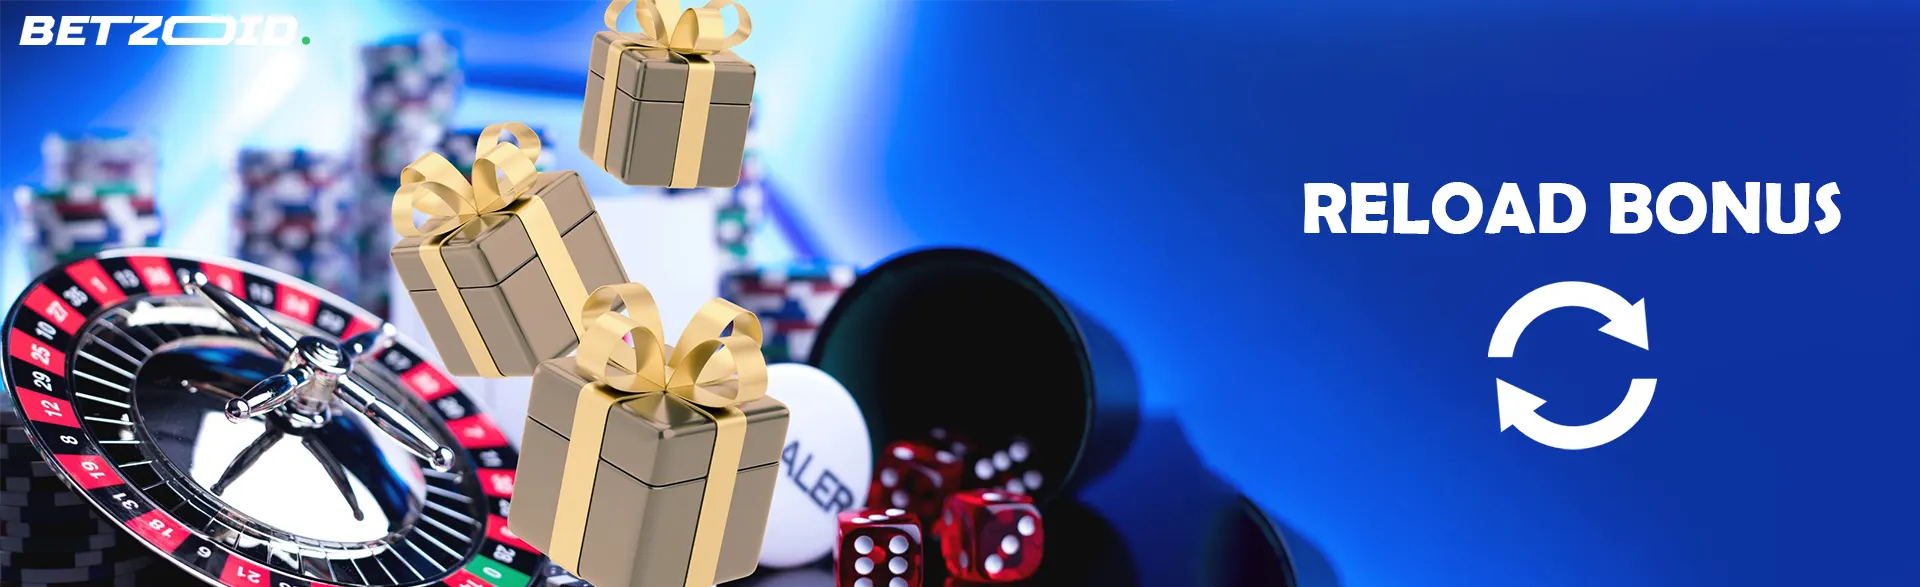 Casino roulette wheel with floating gift boxes, symbolizing the generous reload bonuses offered by casinos in Canada.